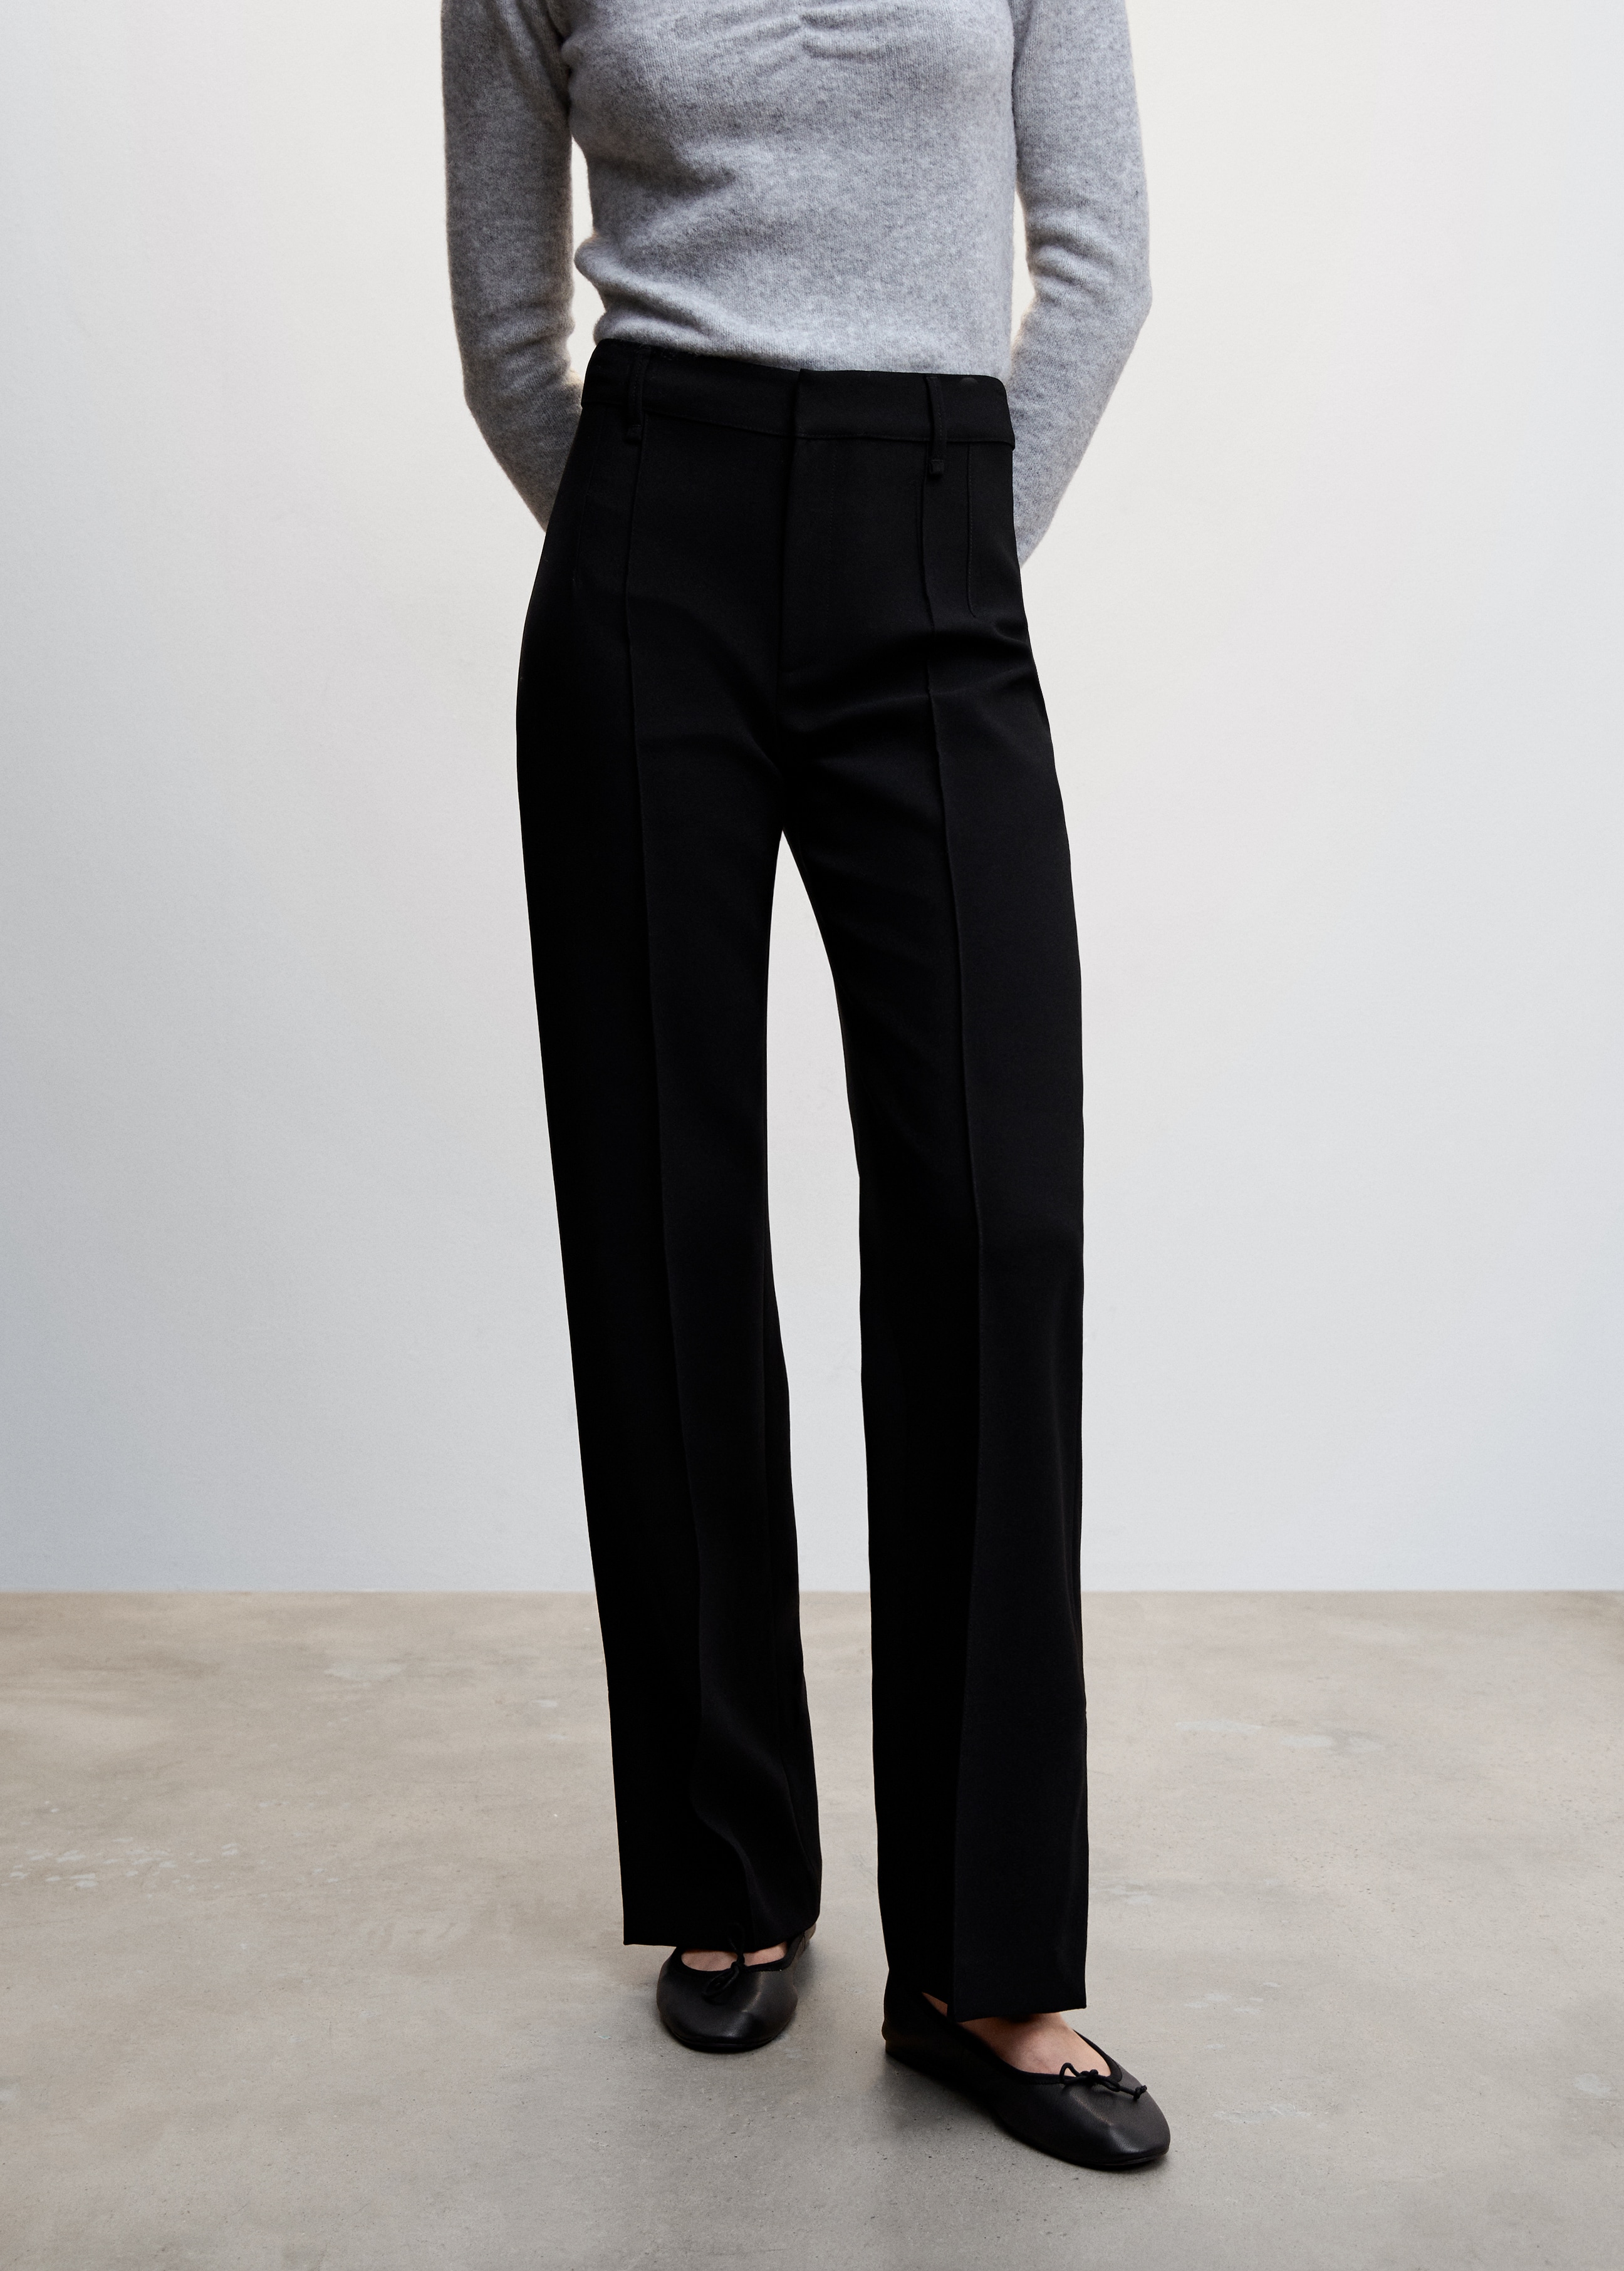 Straight trousers with openings - Medium plane